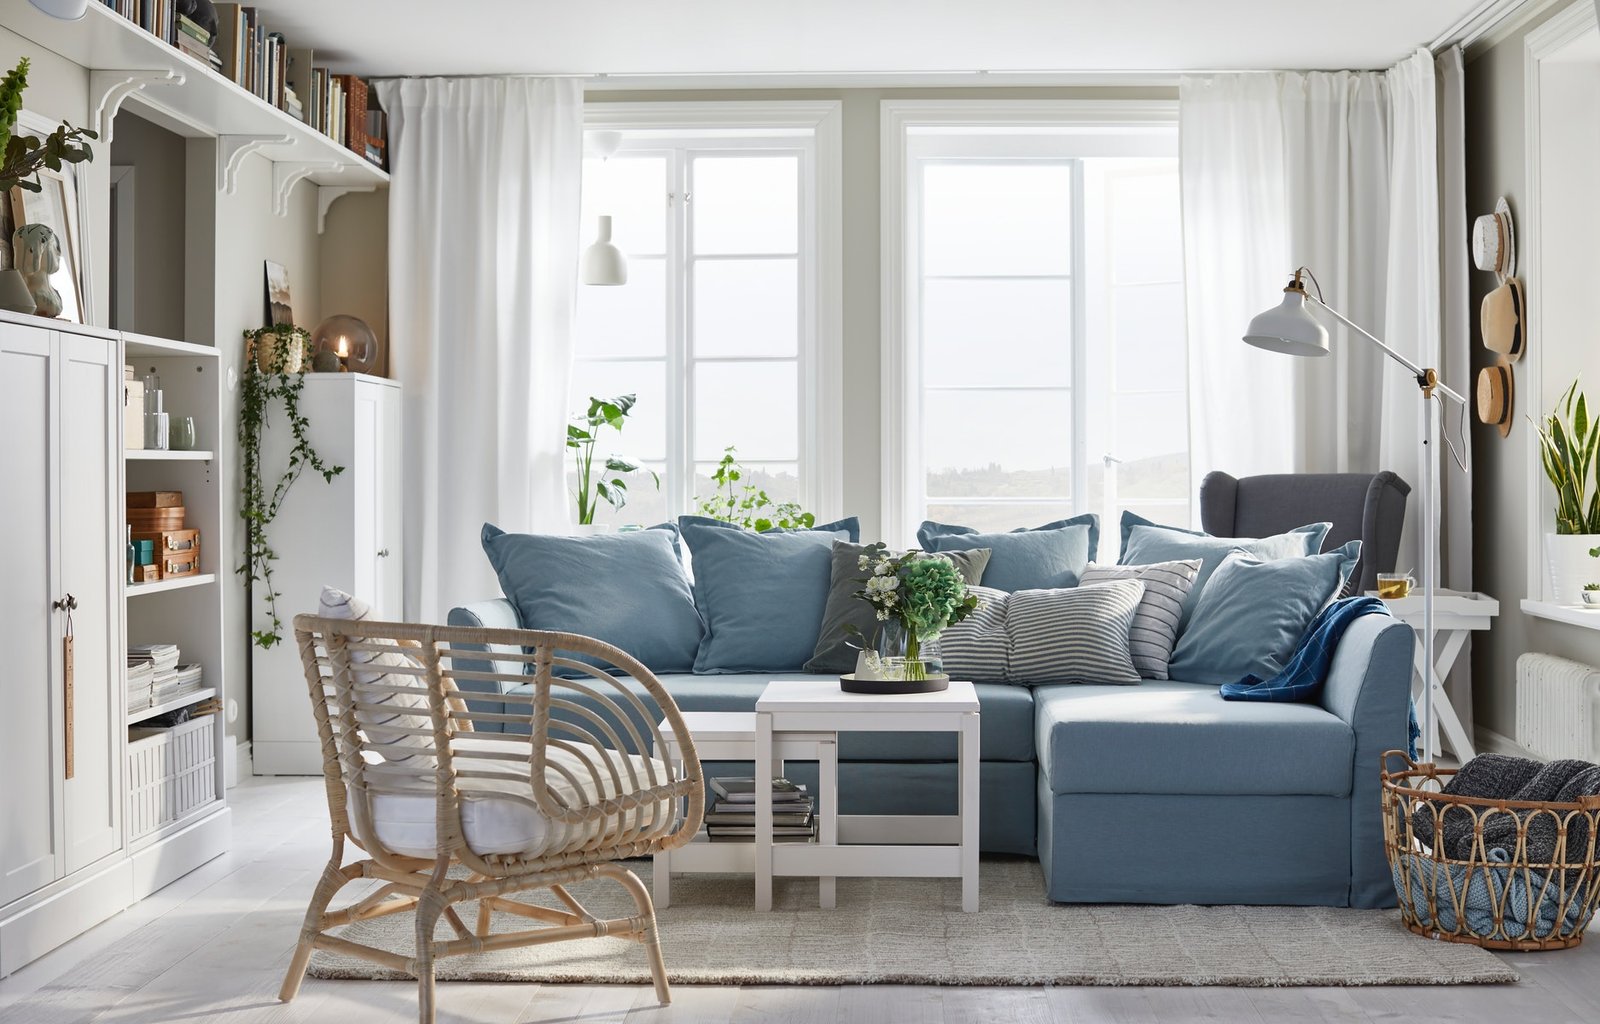 It’s Simple To Learn About Furniture Shopping With This Article